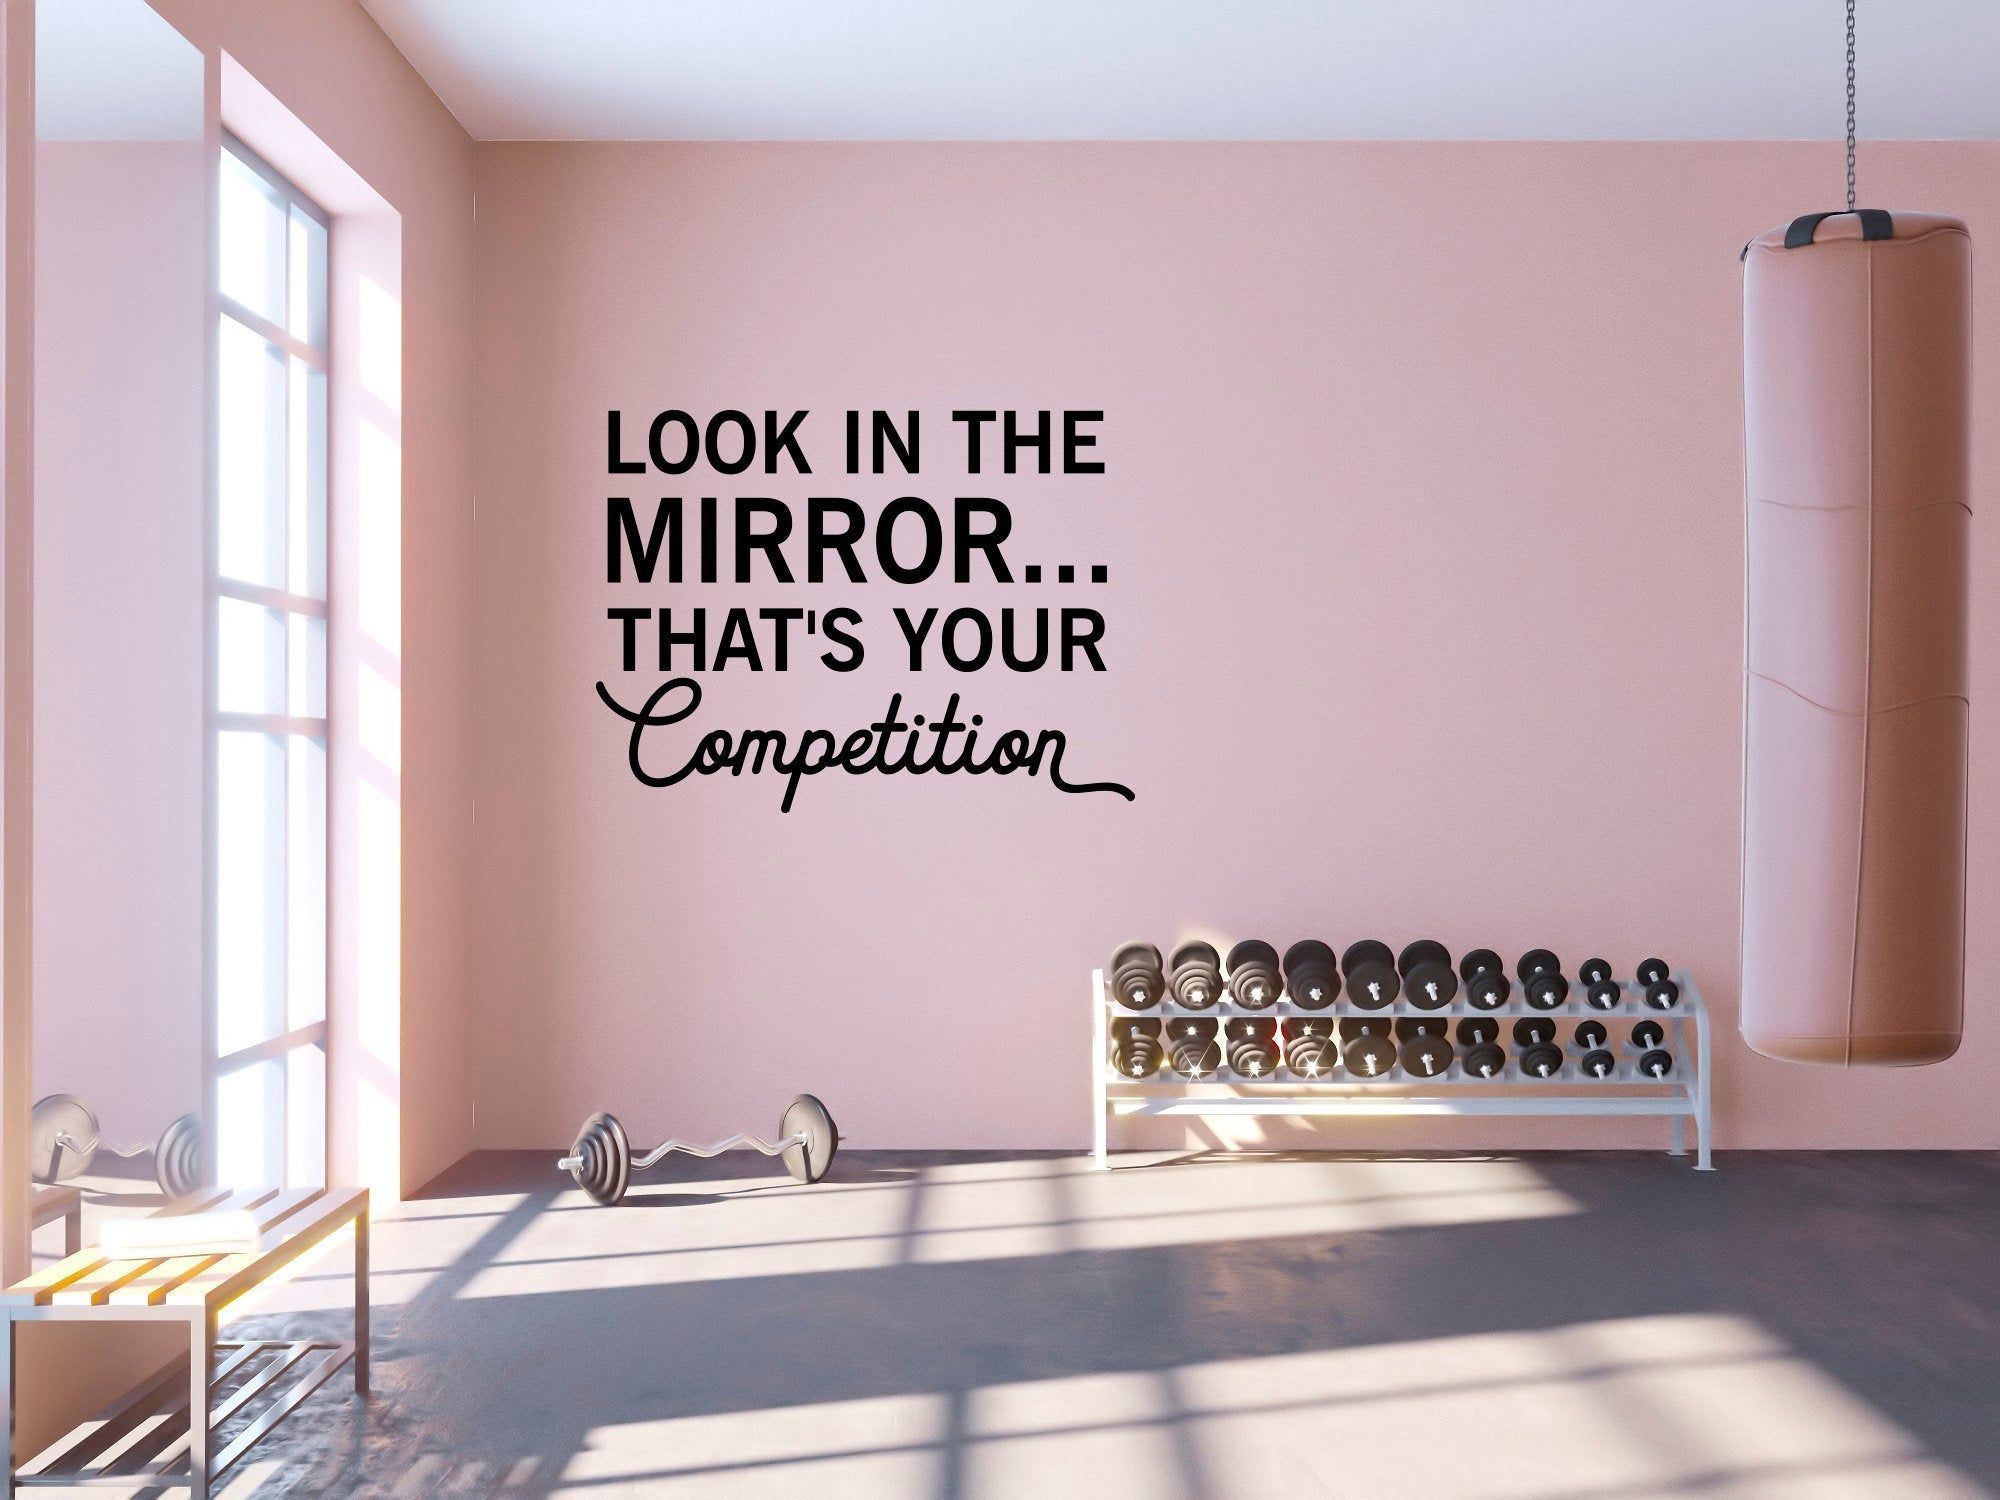 Look in the Mirror...That's Your Competition Quote Wall Decal - Sport Vinyl Stickers, Motivational Gym Decal, Fitness Quote Wall Decal SB155 - Look in the Mirror...That's Your Competition Quote Wall Decal - Sport Vinyl Stickers, Motivational Gym Decal, Fitness Quote Wall Decal SB155 -   14 mobile fitness Room ideas